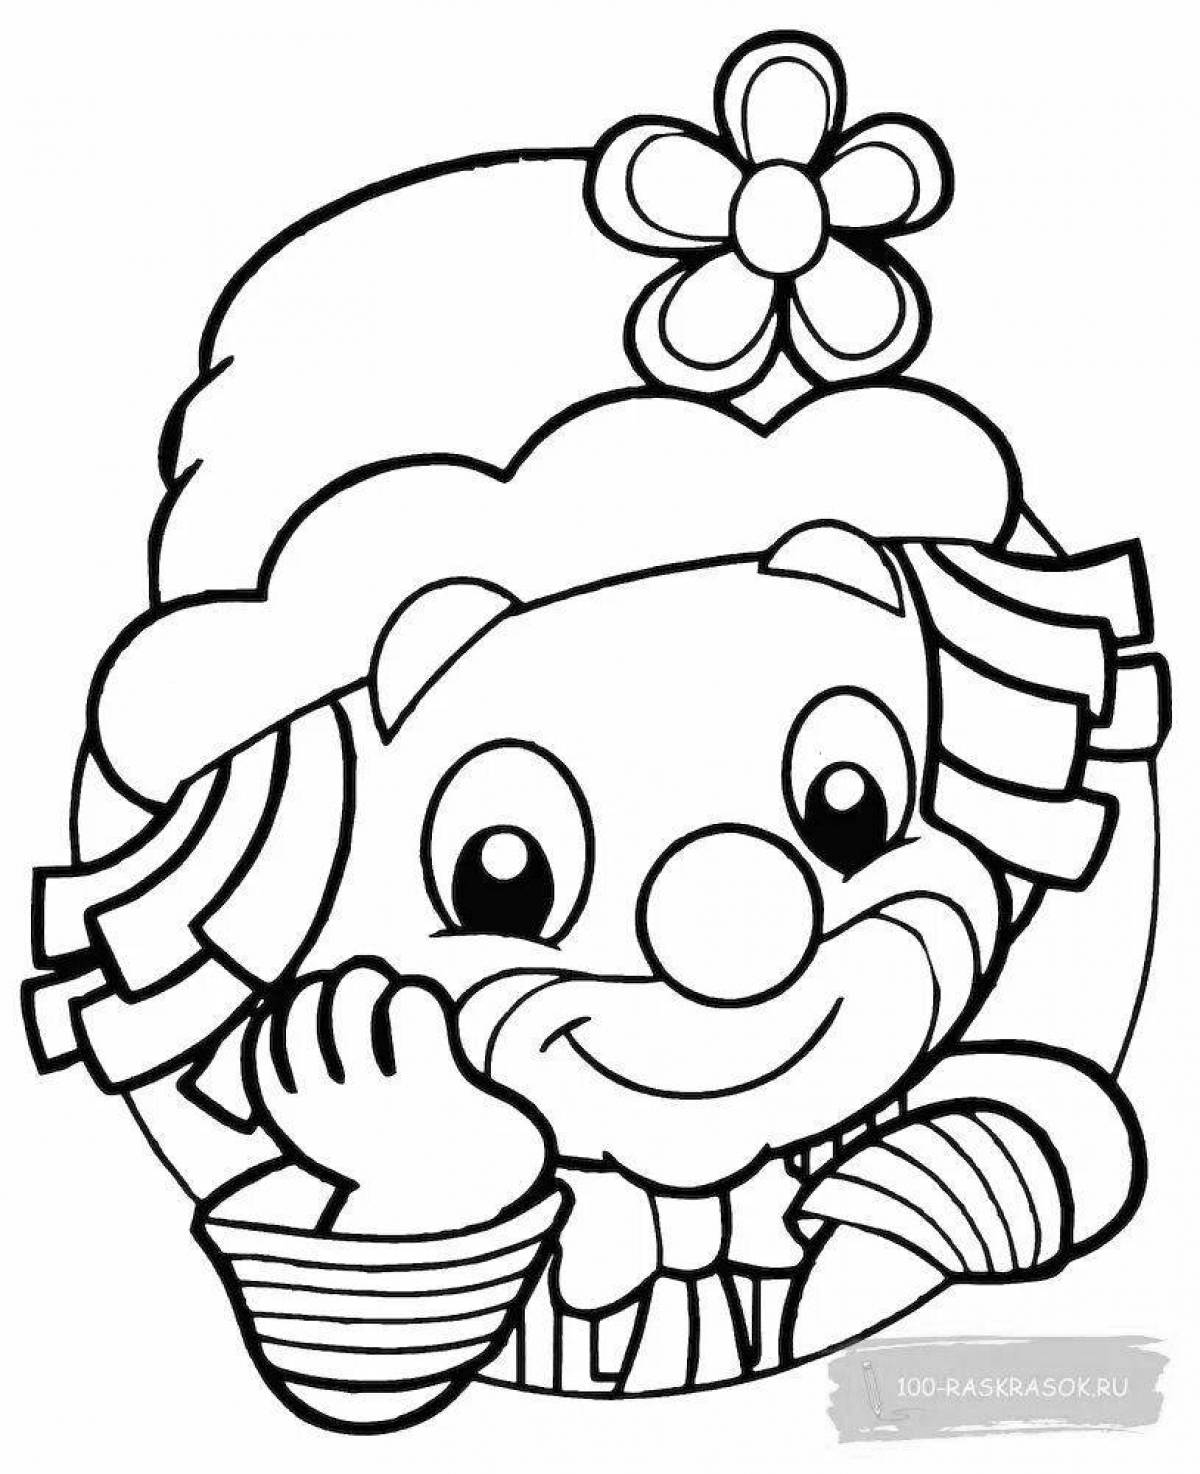 Colouring bright clown for children 6-7 years old